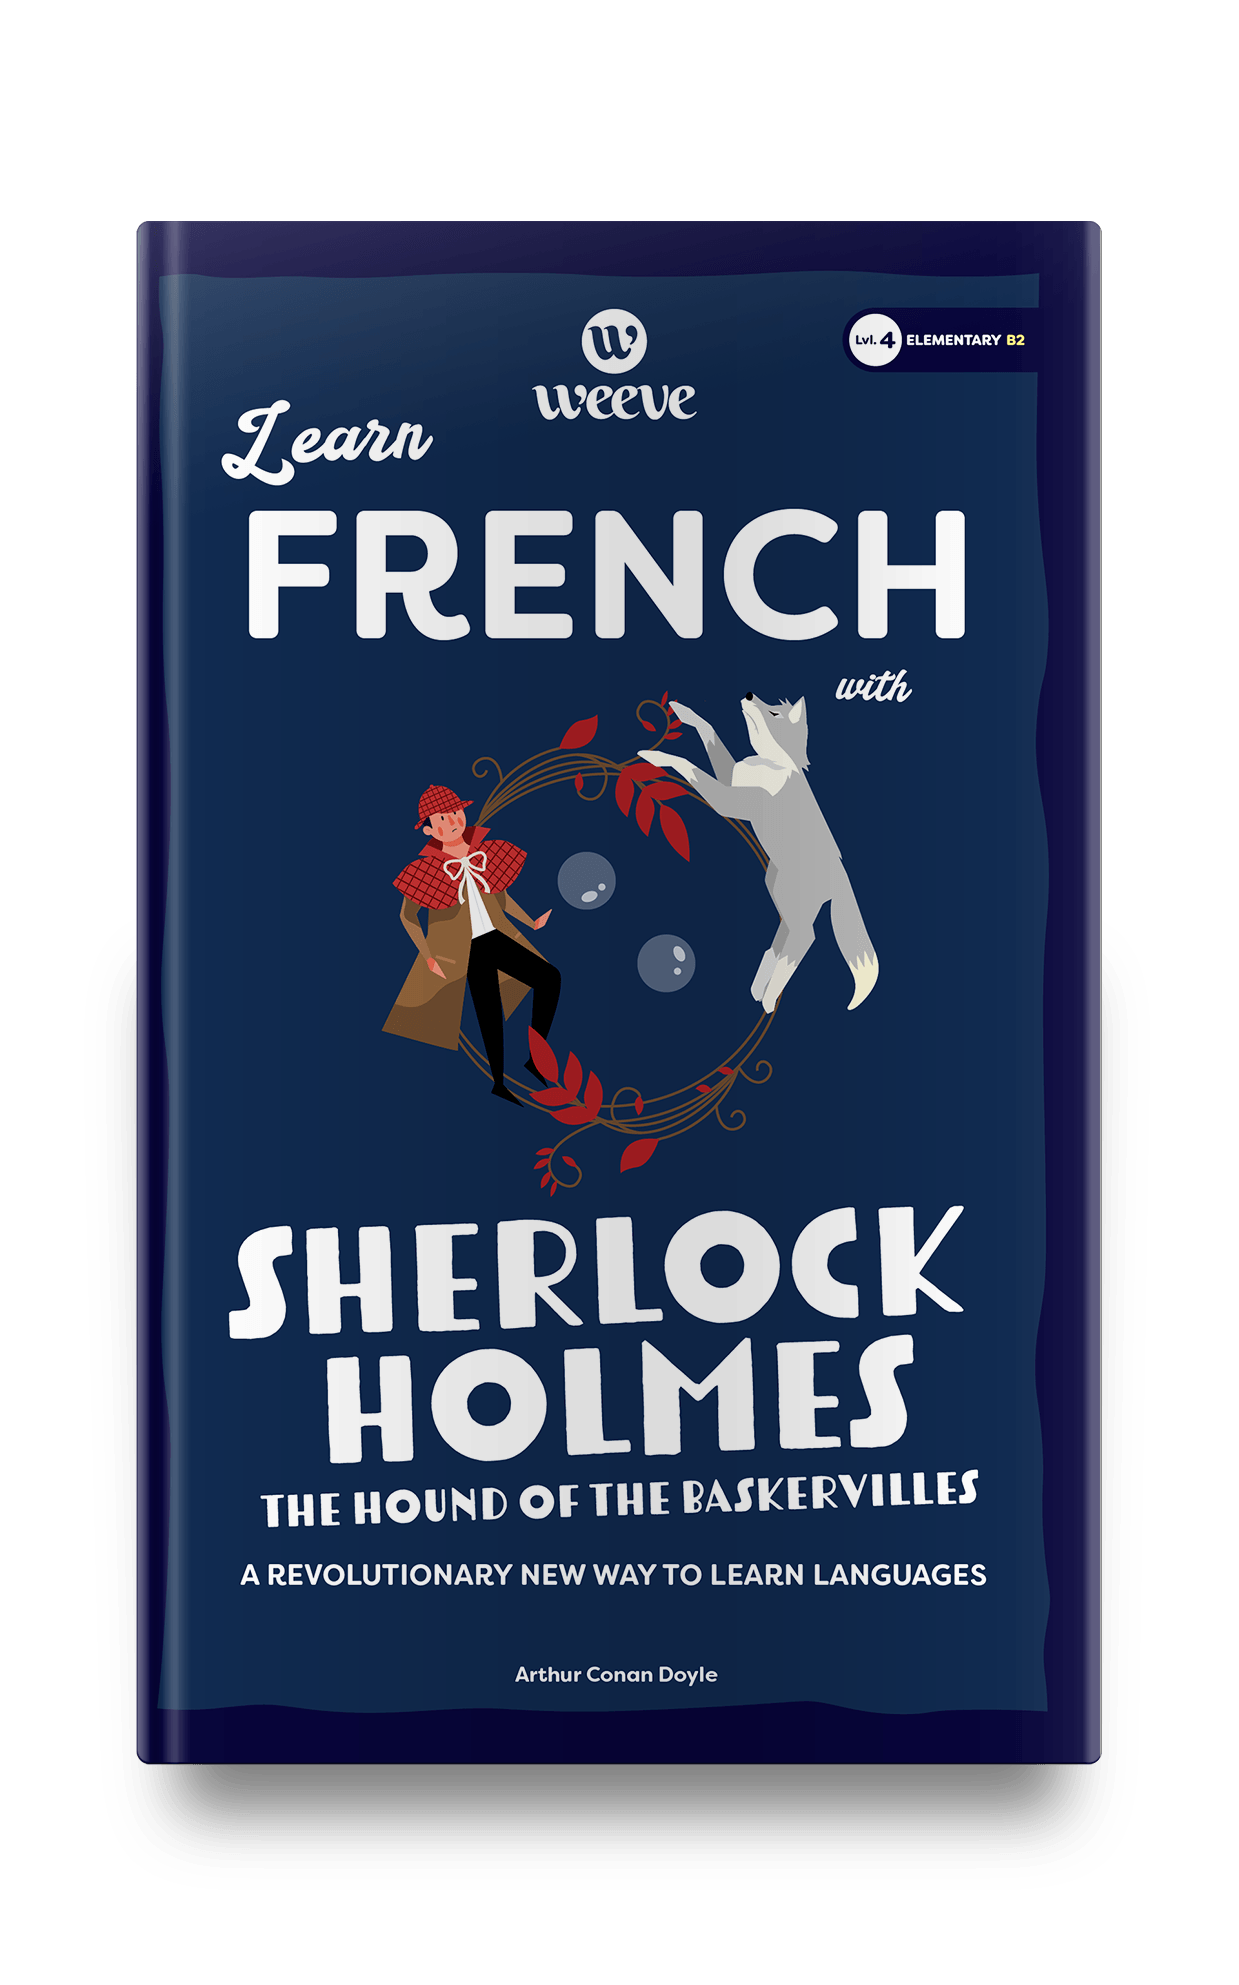 Learn French With Sherlock Holmes The Hound of the Baskervilles - Weeve